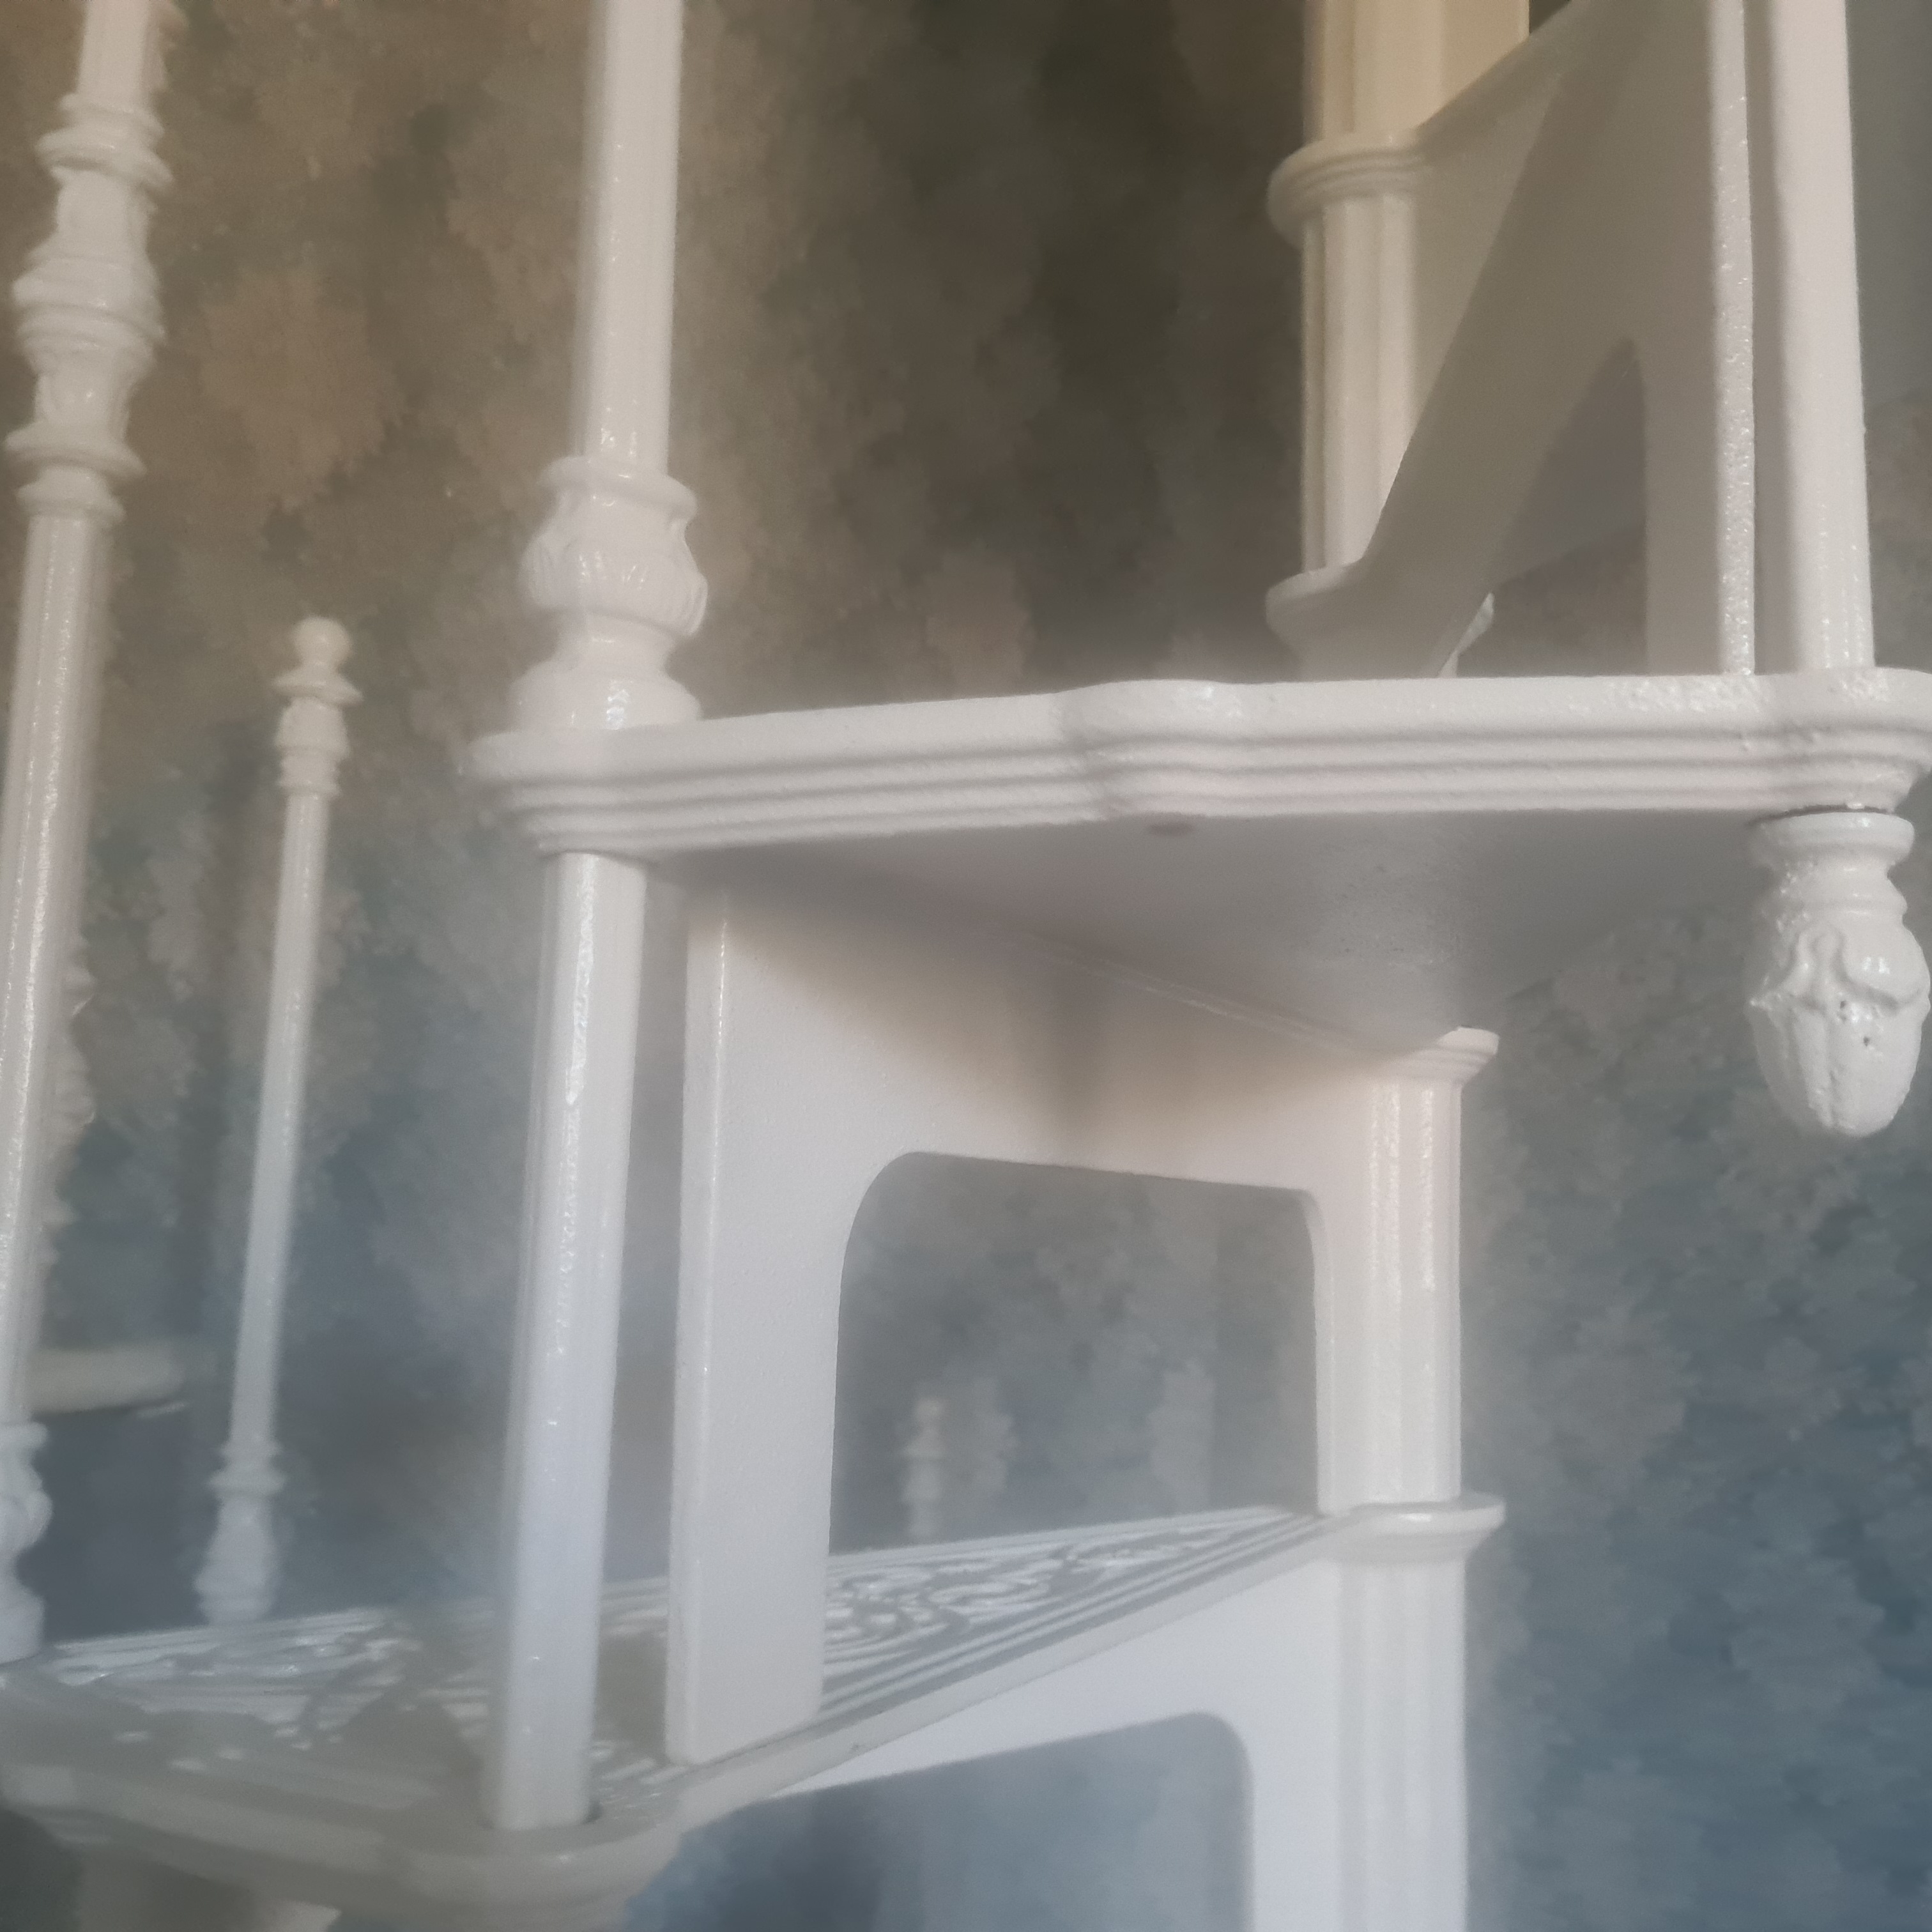 Installation of a spiral cast iron staircase model Mirecourt de Luxe (Germany)